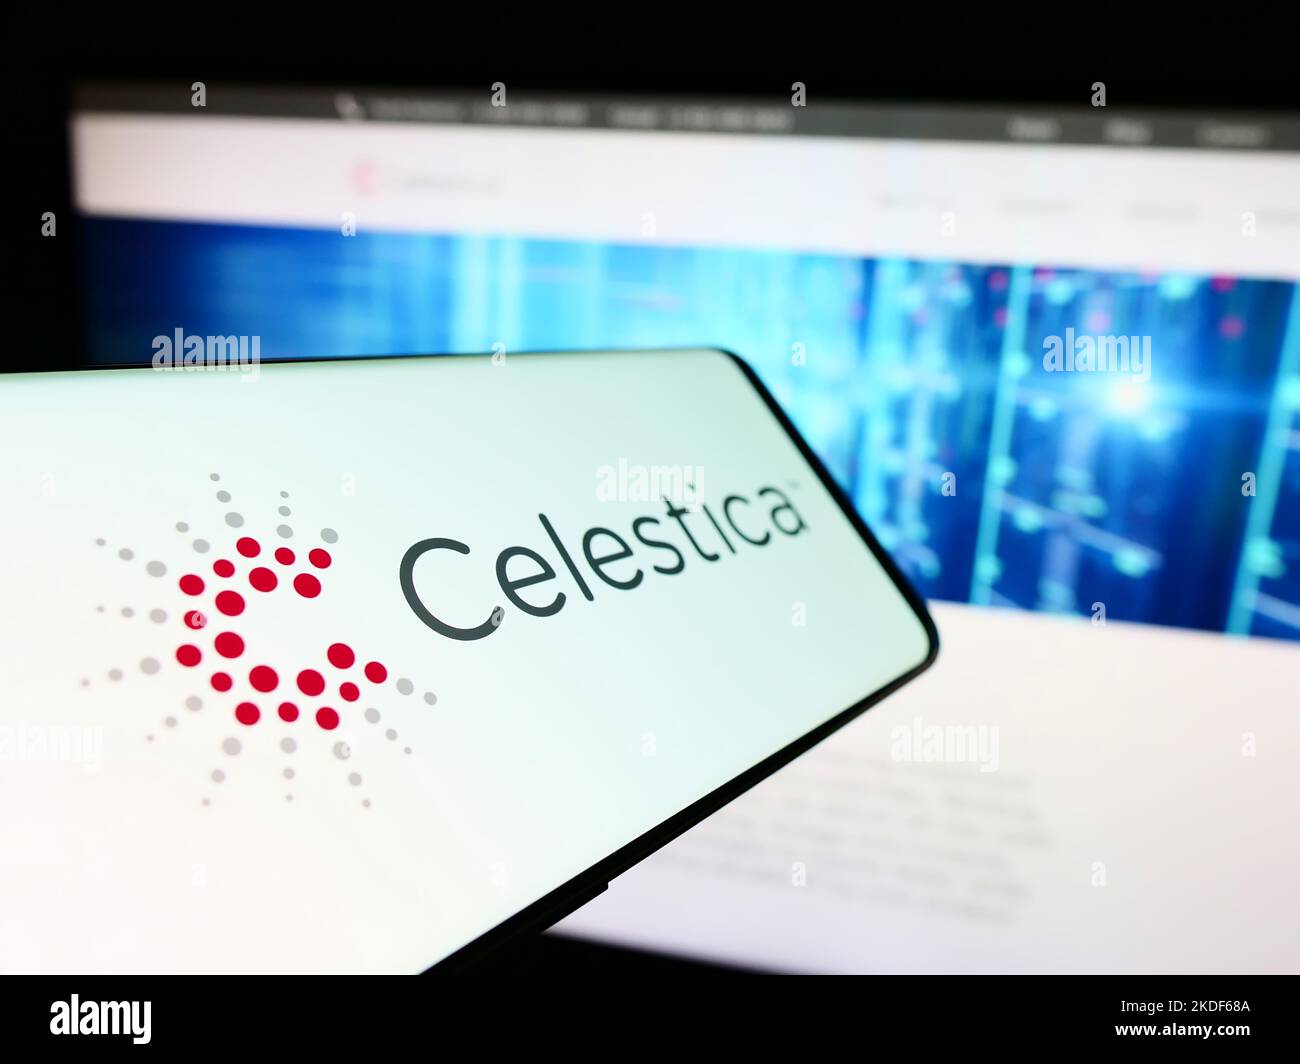 Smartphone with logo of Canadian electronics company Celestica Inc. on screen in front of business website. Focus on center-left of phone display. Stock Photo